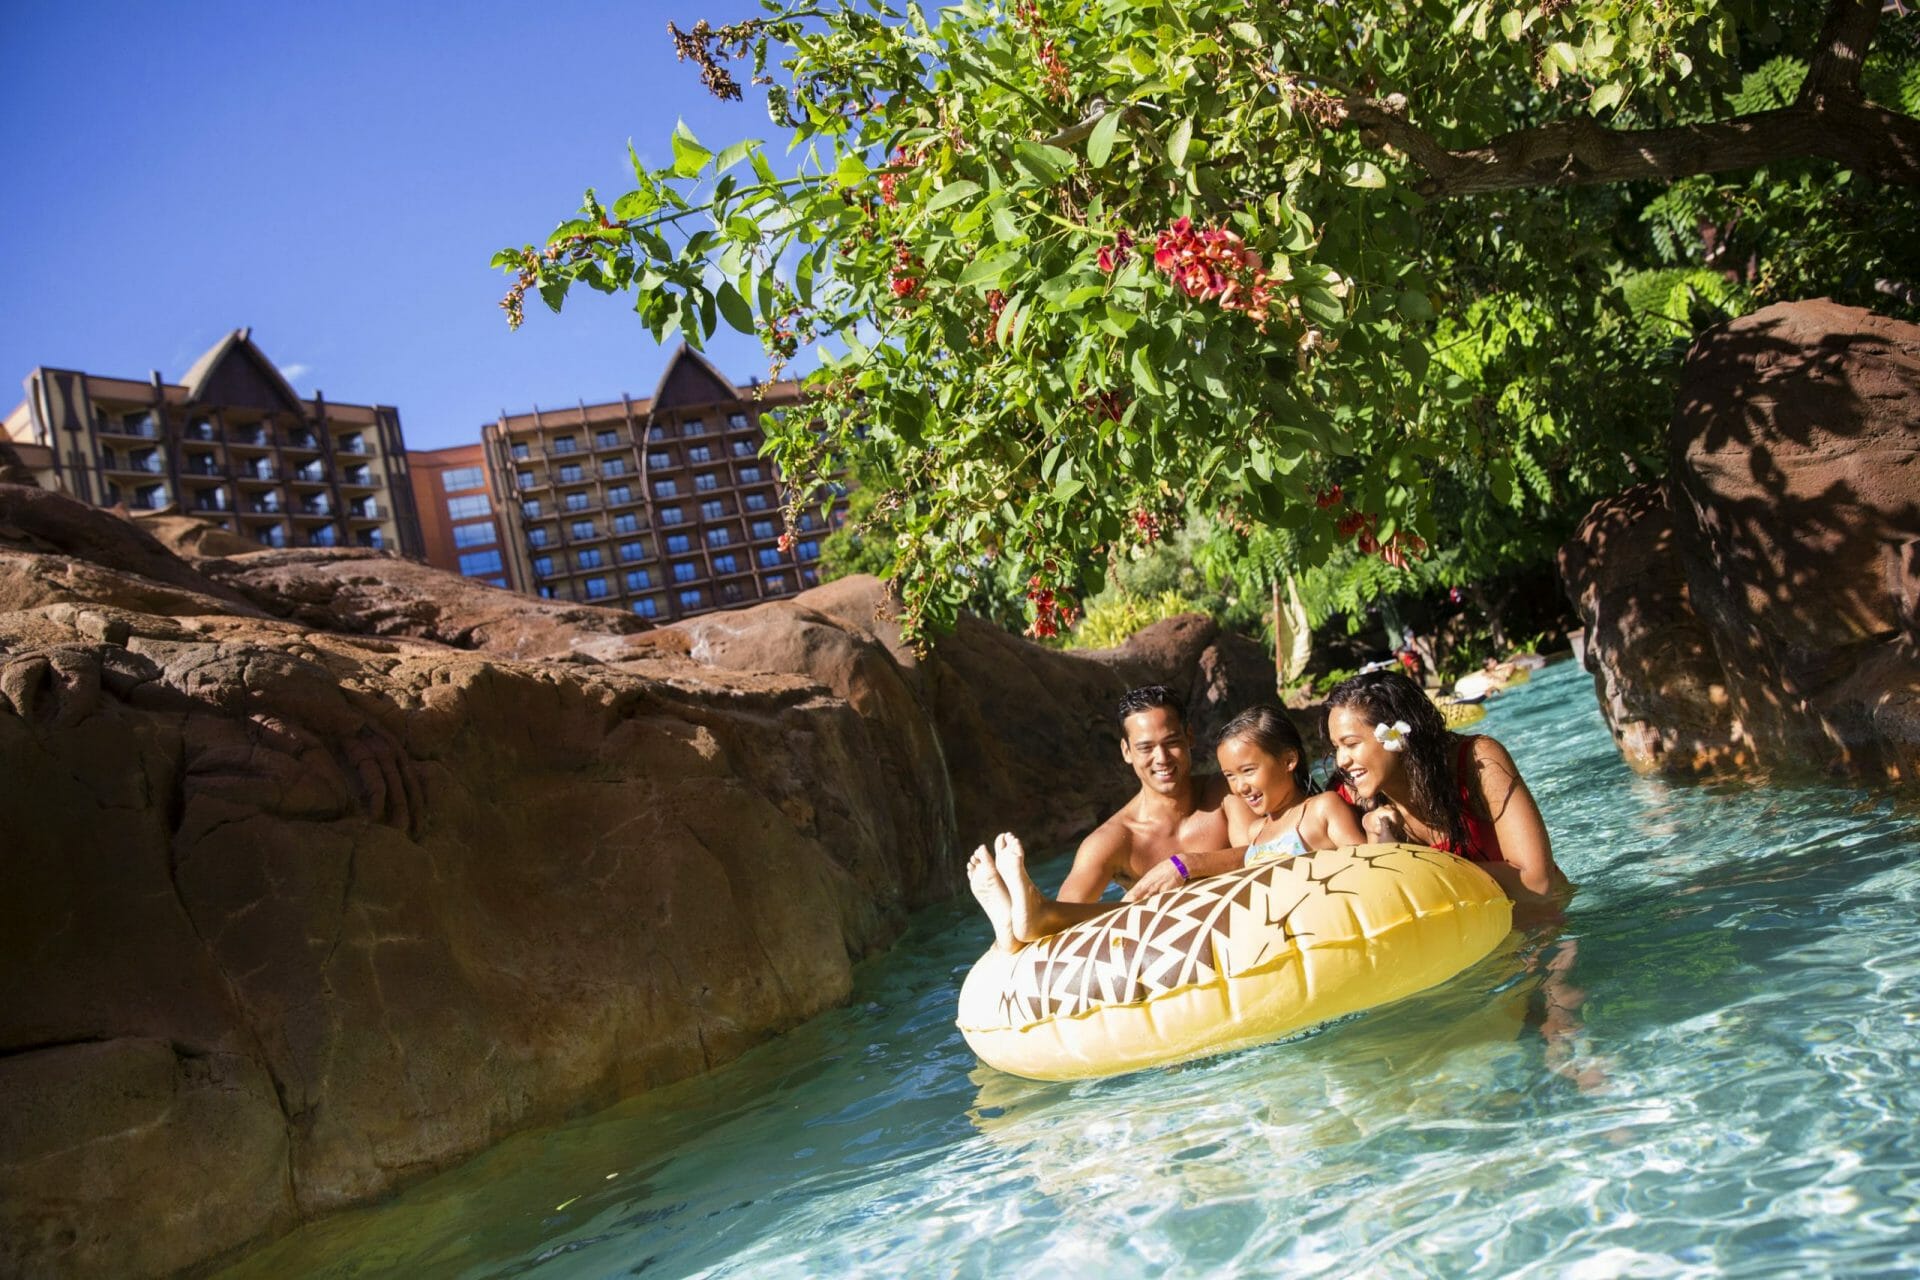 Bookings for 2021 Vacations at Aulani, A Disney Resort & Spa Are Now Available